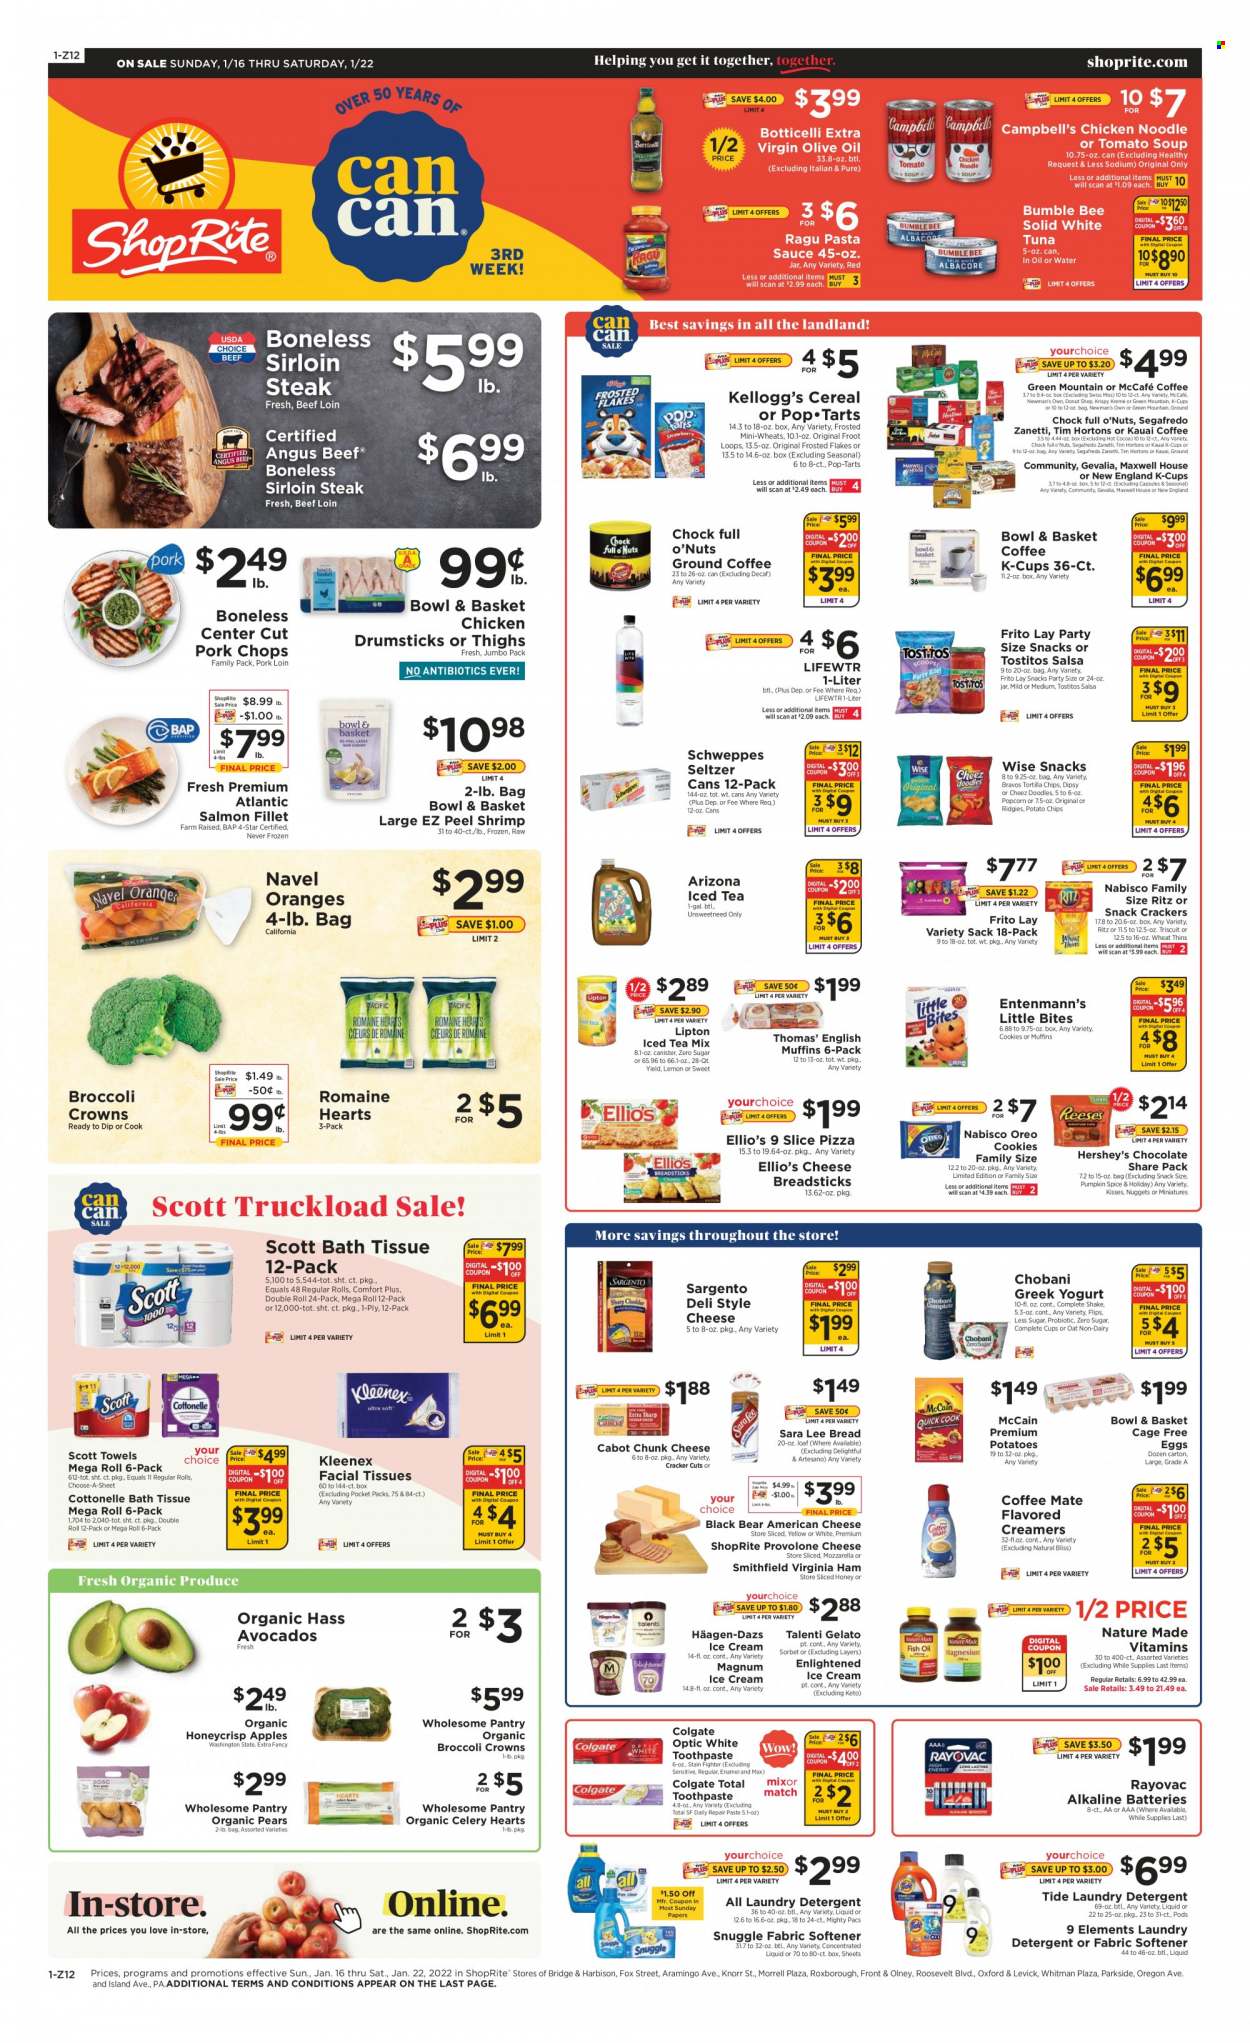 thumbnail - ShopRite Flyer - 01/16/2022 - 01/22/2022 - Sales products - bread, Sara Lee, Bowl & Basket, Entenmann's, celery, sleeved celery, apples, avocado, pears, oranges, salmon, salmon fillet, tuna, shrimps, Campbell's, tomato soup, pizza, pasta sauce, soup, nuggets, Bumble Bee, Knorr, sauce, noodles, ragú pasta, ham, virginia ham, american cheese, chunk cheese, Provolone, Sargento, greek yoghurt, Oreo, yoghurt, Chobani, Swiss Miss, shake, eggs, cage free eggs, dip, ice cream, Hershey's, Häagen-Dazs, Talenti Gelato, Enlightened lce Cream, gelato, McCain, cookies, crackers, Kellogg's, Pop-Tarts, Little Bites, RITZ, bread sticks, tortilla chips, potato chips, Thins, popcorn, Tostitos, cereals, Frosted Flakes, spice, salsa, ragu, extra virgin olive oil, olive oil, Schweppes, Lipton, ice tea, AriZona, seltzer water, Lifewtr, hot cocoa, Maxwell House, coffee capsules, McCafe, K-Cups, Gevalia, Segafredo, Green Mountain, chicken drumsticks, beef meat, beef sirloin, steak, sirloin steak, pork chops, pork loin, pork meat, bath tissue, Cottonelle, Kleenex, Scott, detergent, Snuggle, Tide, fabric softener, laundry detergent, Colgate, toothpaste, facial tissues, battery, alkaline batteries, Nature Made, navel oranges. Page 1.